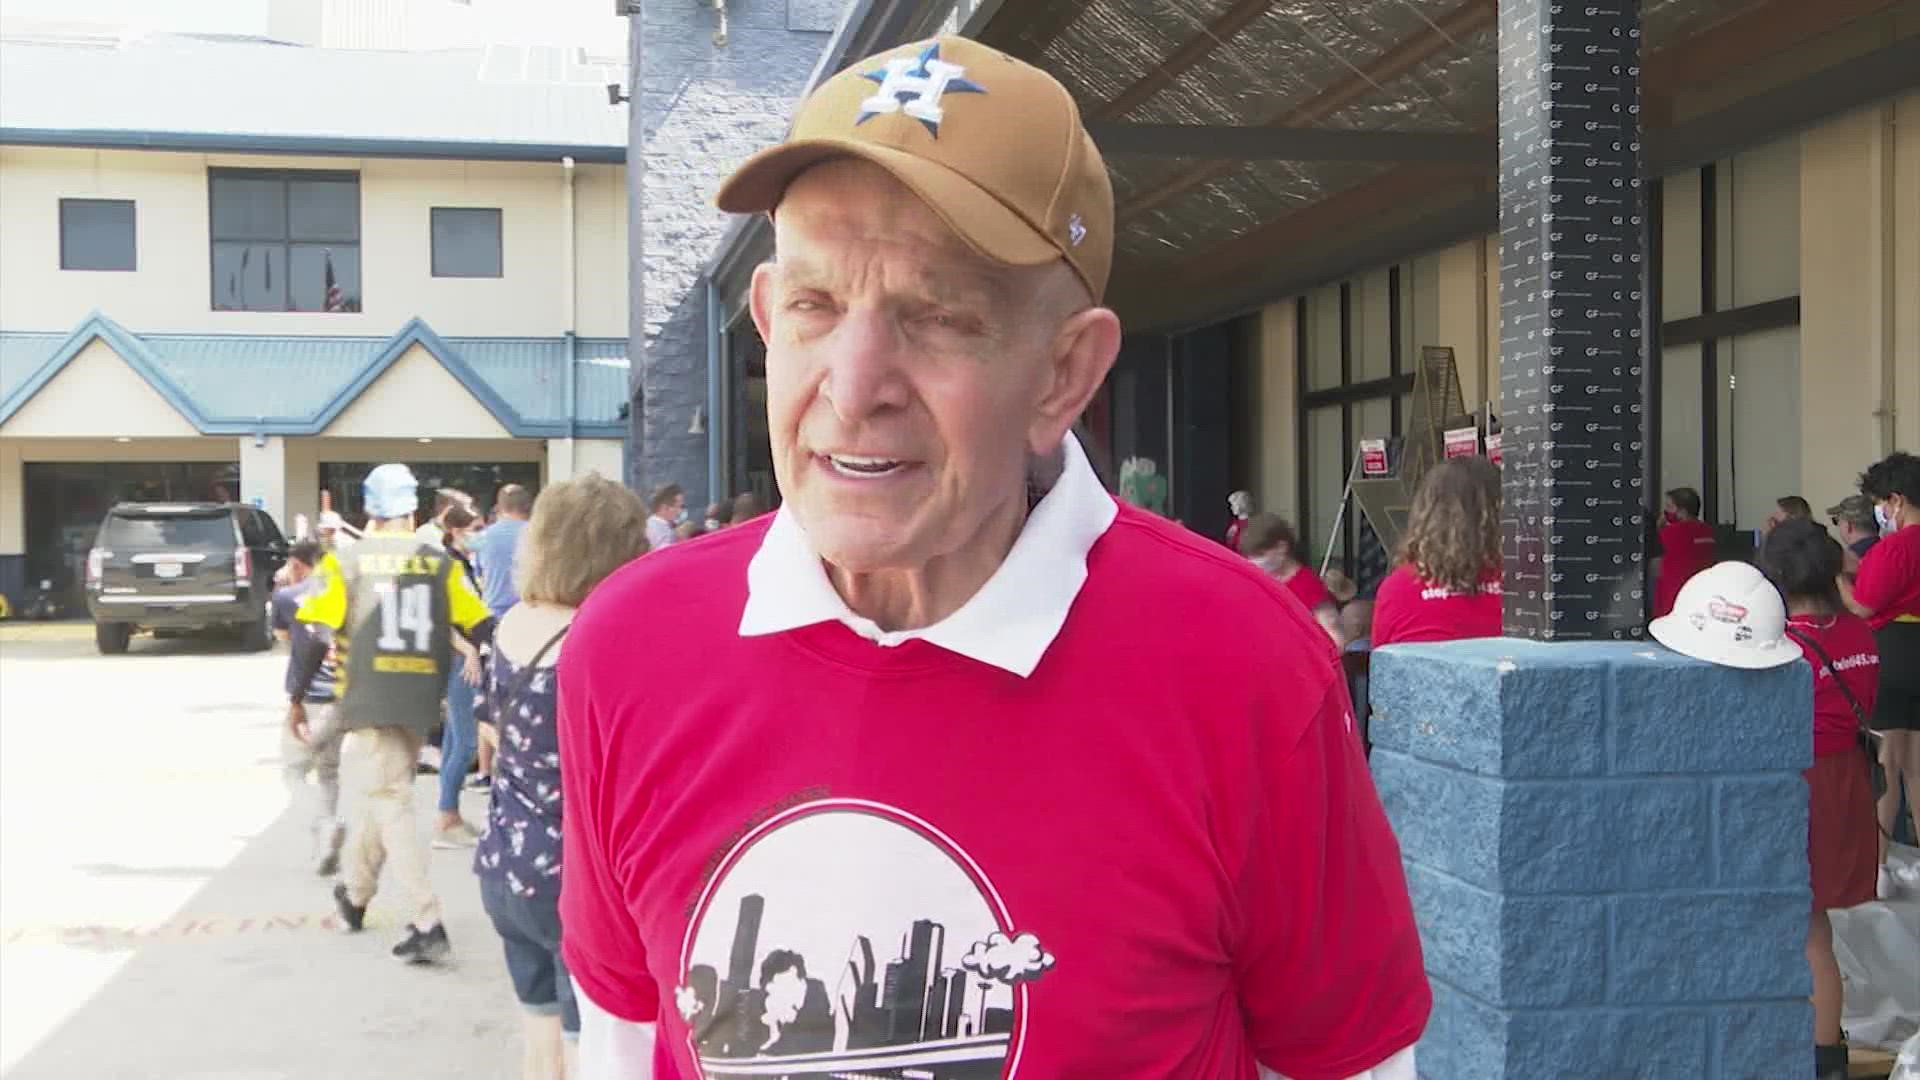 The effort to stop TxDOT’s controversial plan expanding I-45 is getting a major boost from Jim “Mattress Mack” McIngvale.